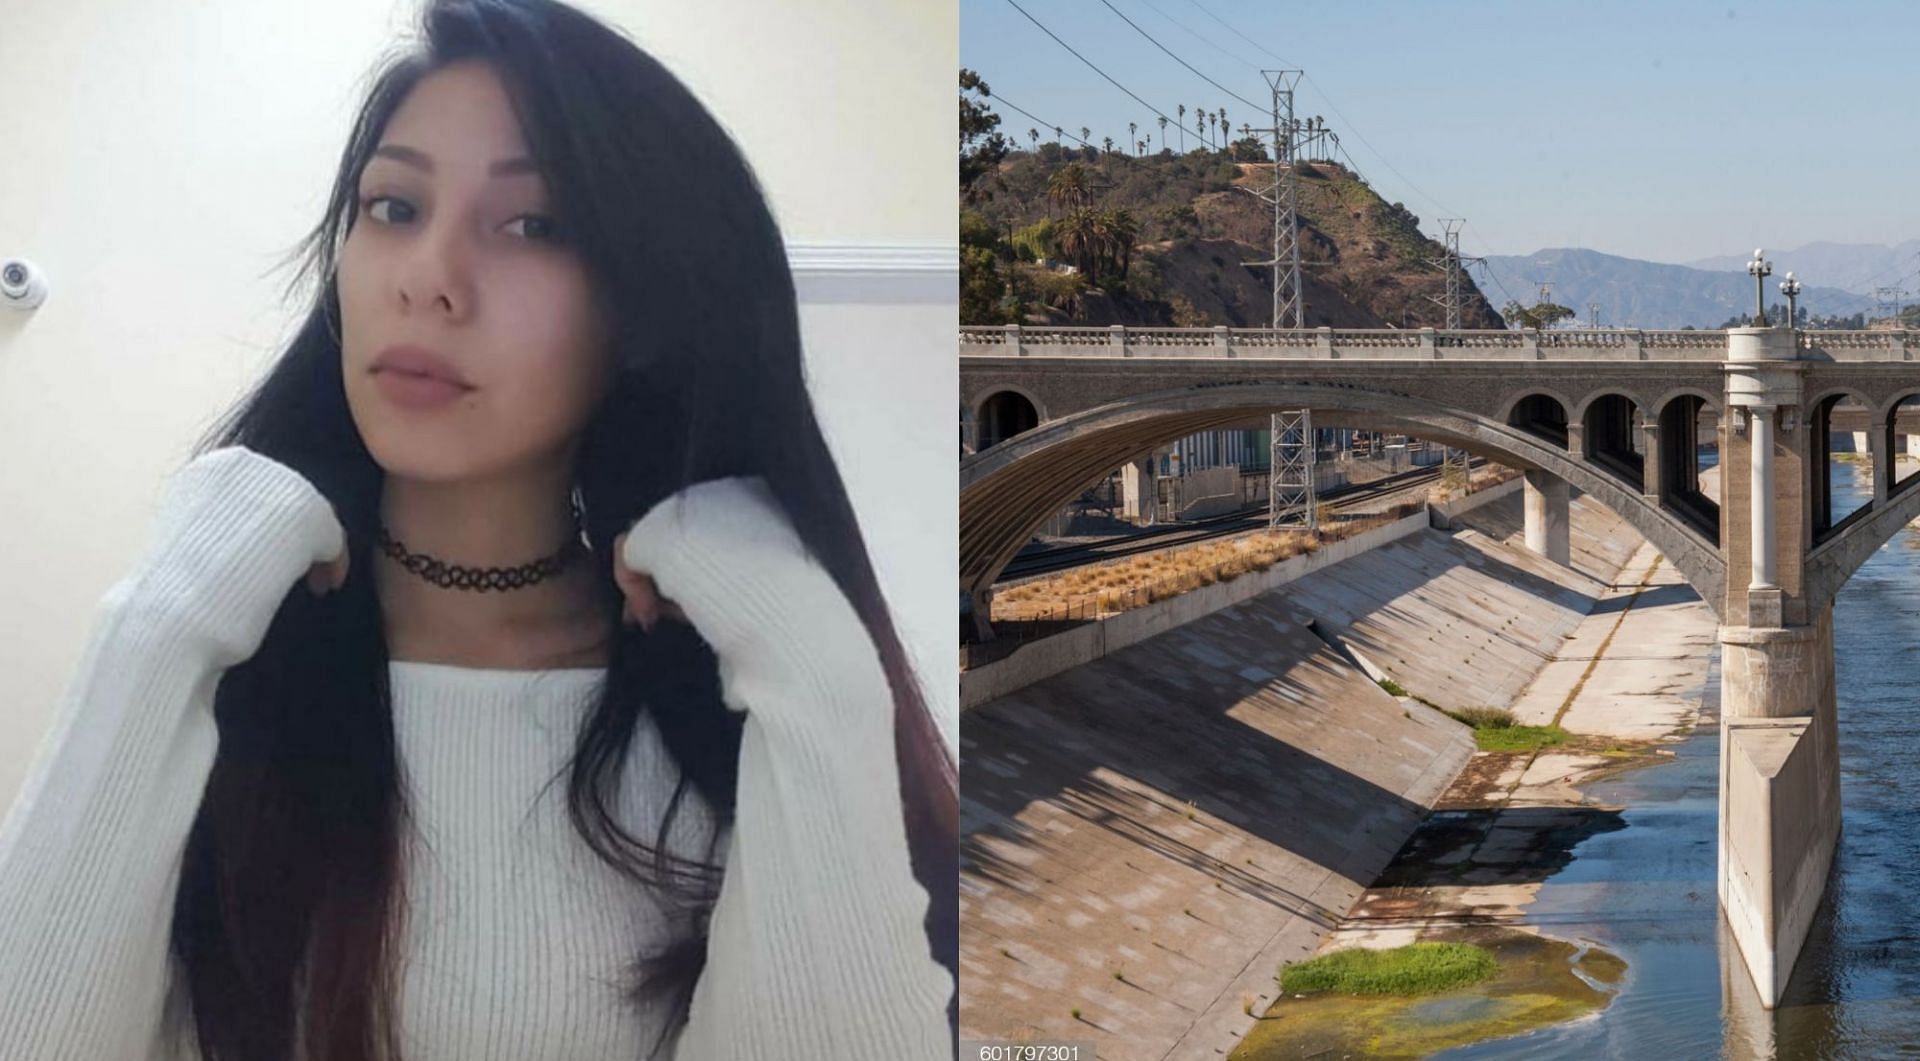 Missy Hernandez was found dead beneath a California aqueduct (Image via Fresno County Sheriff&rsquo;s Office and Getty Images)